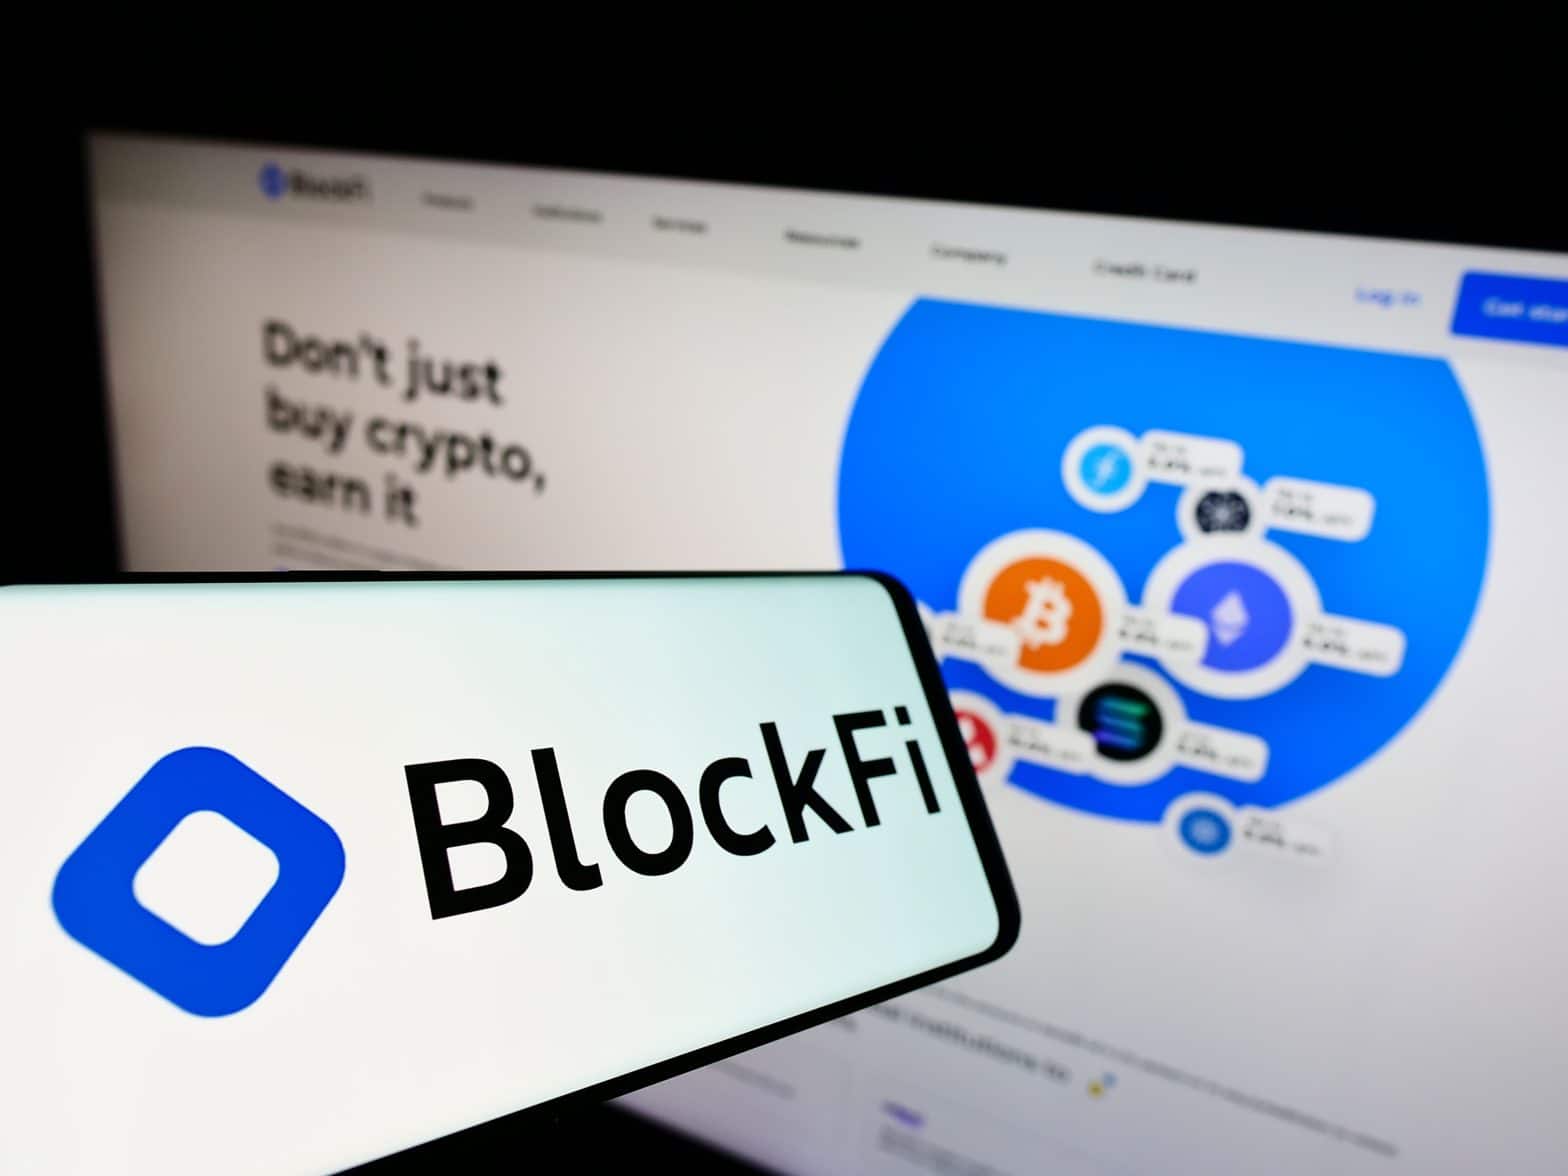 BlockFi is a cryptocurrency trading and wallet